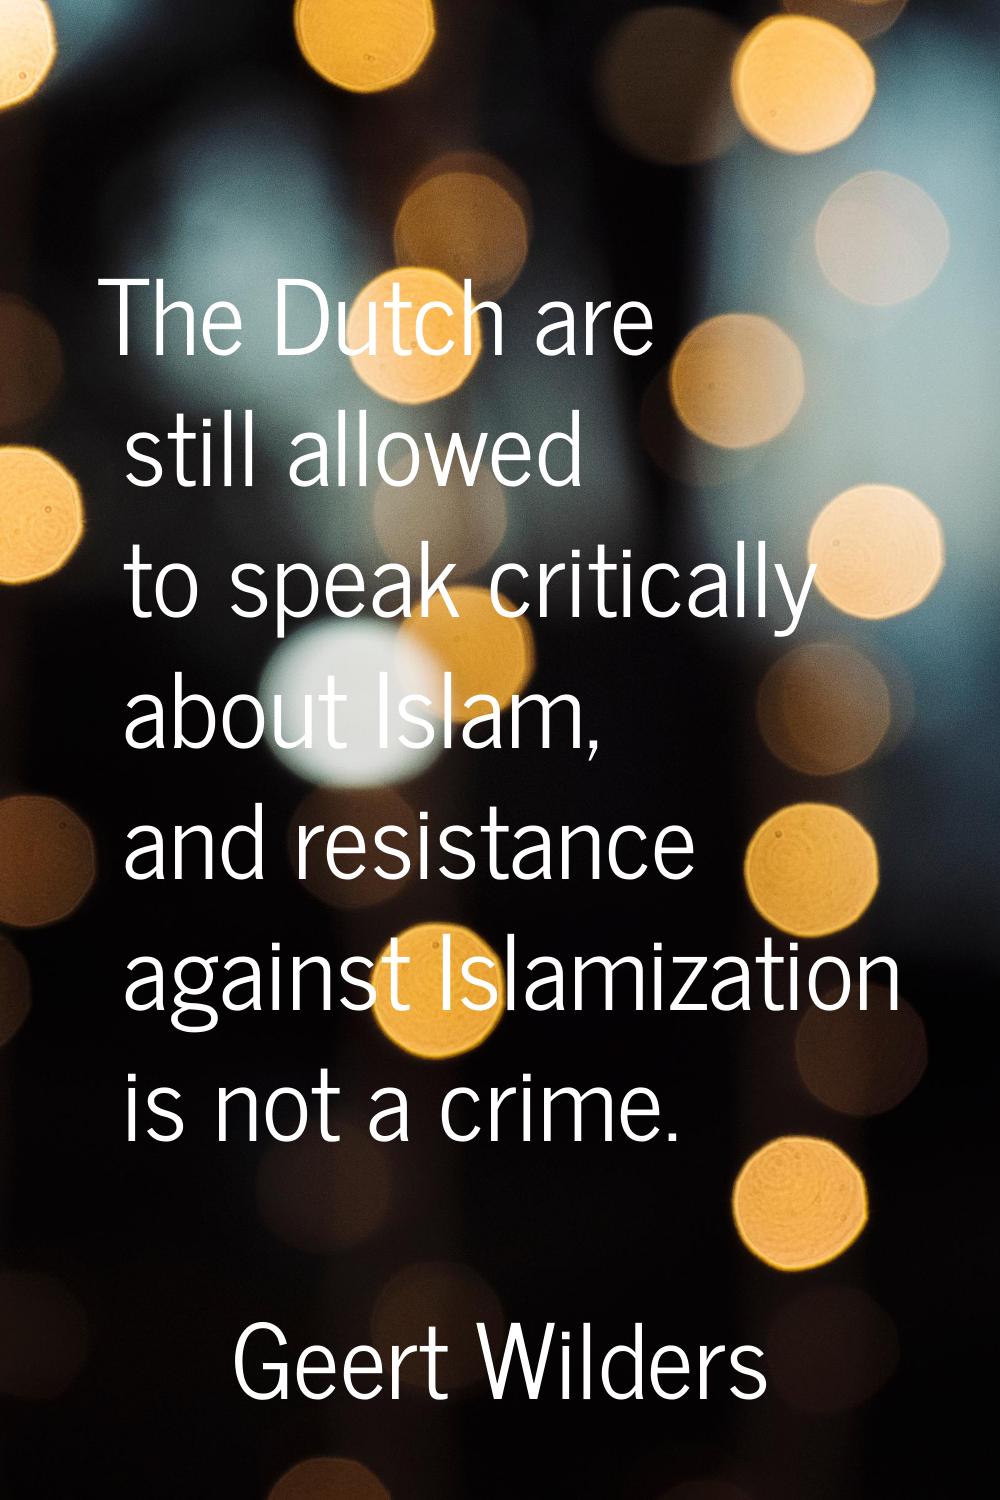 The Dutch are still allowed to speak critically about Islam, and resistance against Islamization is